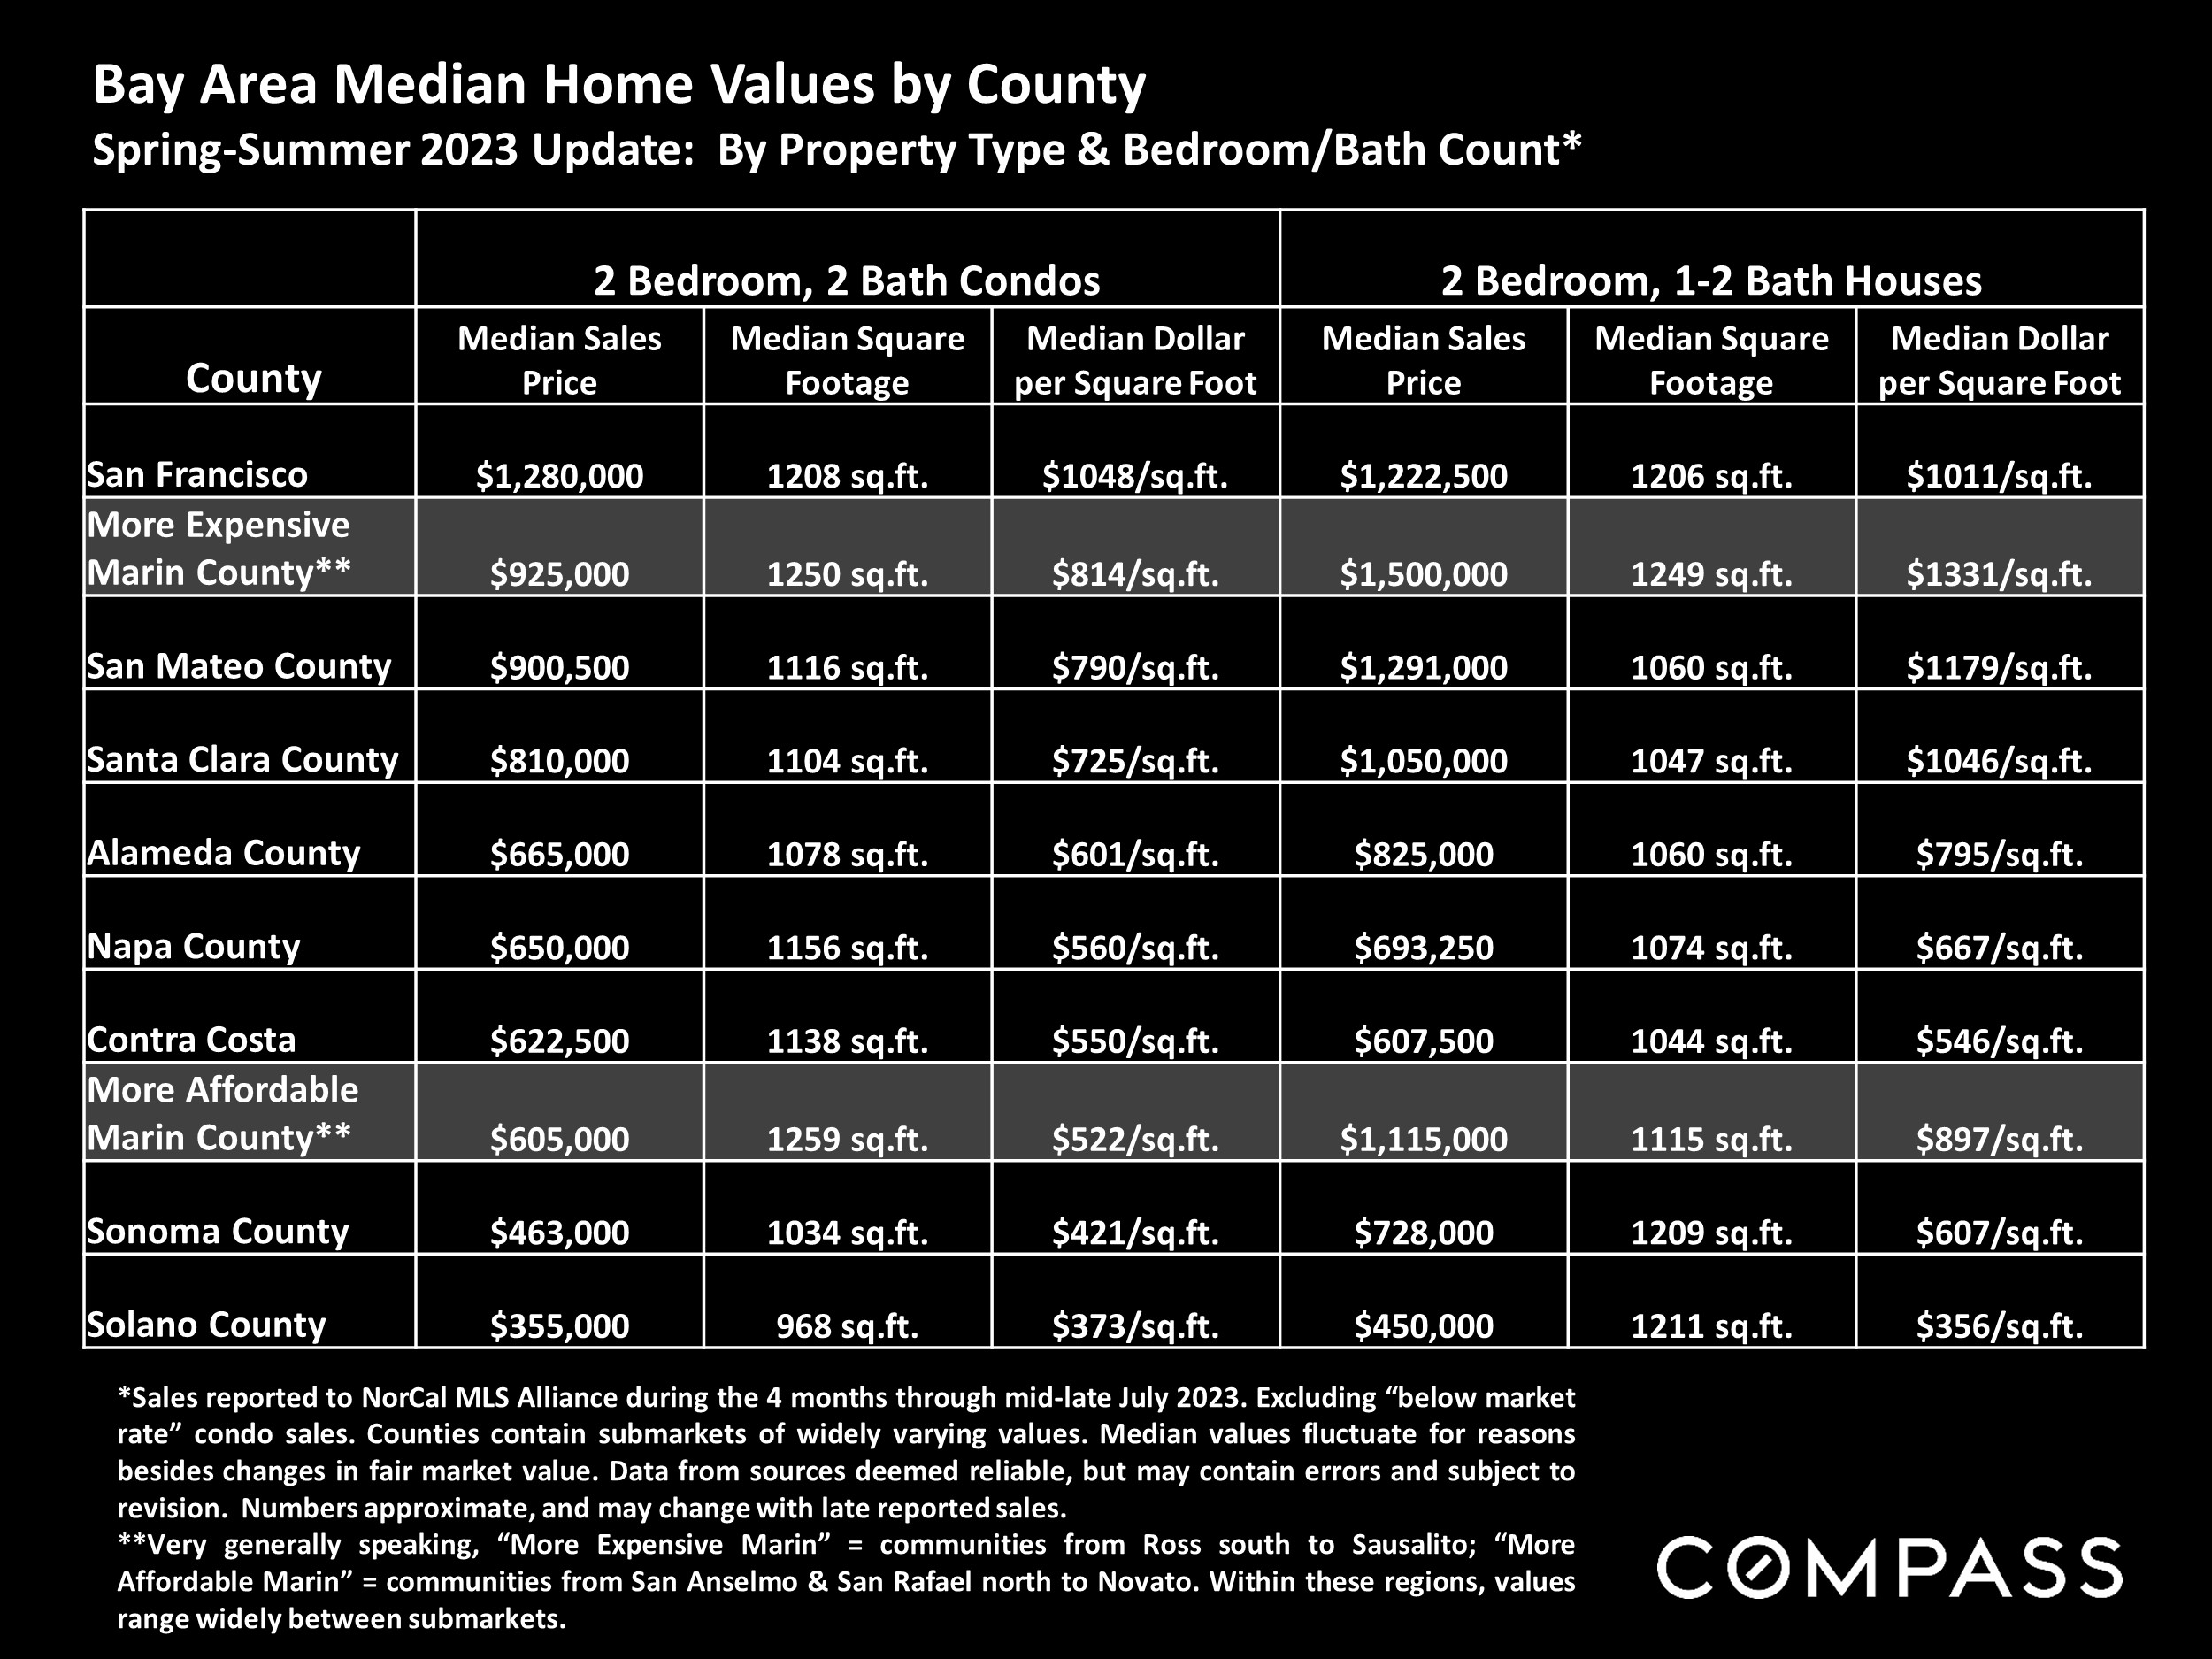 Bay Area Median Home Values by County Spring-Summer 2023 Update: By Property Type & Bedroom/Bath Count*